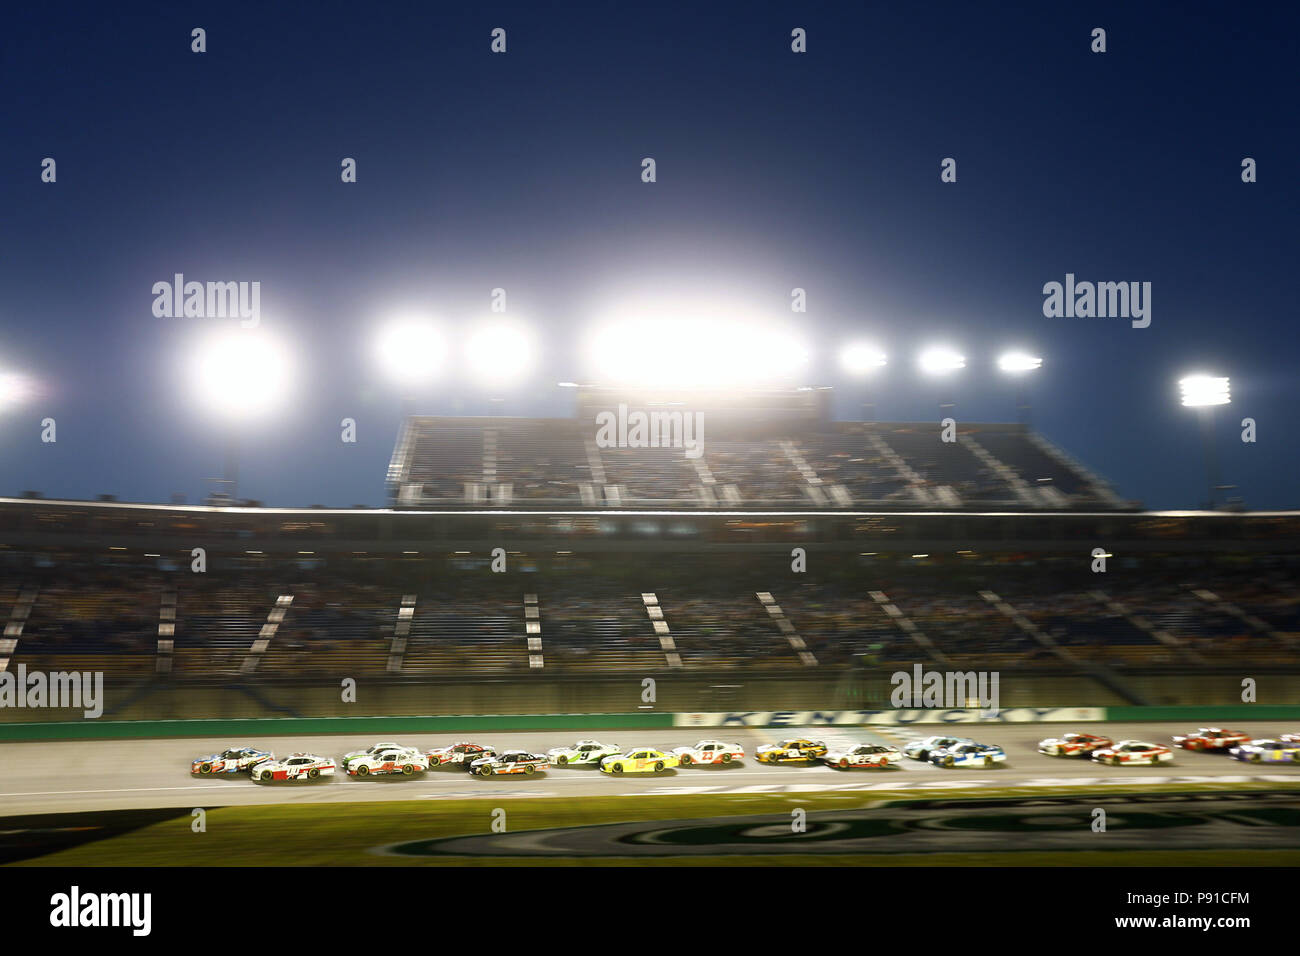 Sparta, Kentucky, USA. 13th July, 2018. The NASCAR Xfinity Series races during the Alsco 300 at Kentucky Speedway in Sparta, Kentucky. Credit: Chris Owens Asp Inc/ASP/ZUMA Wire/Alamy Live News Stock Photo